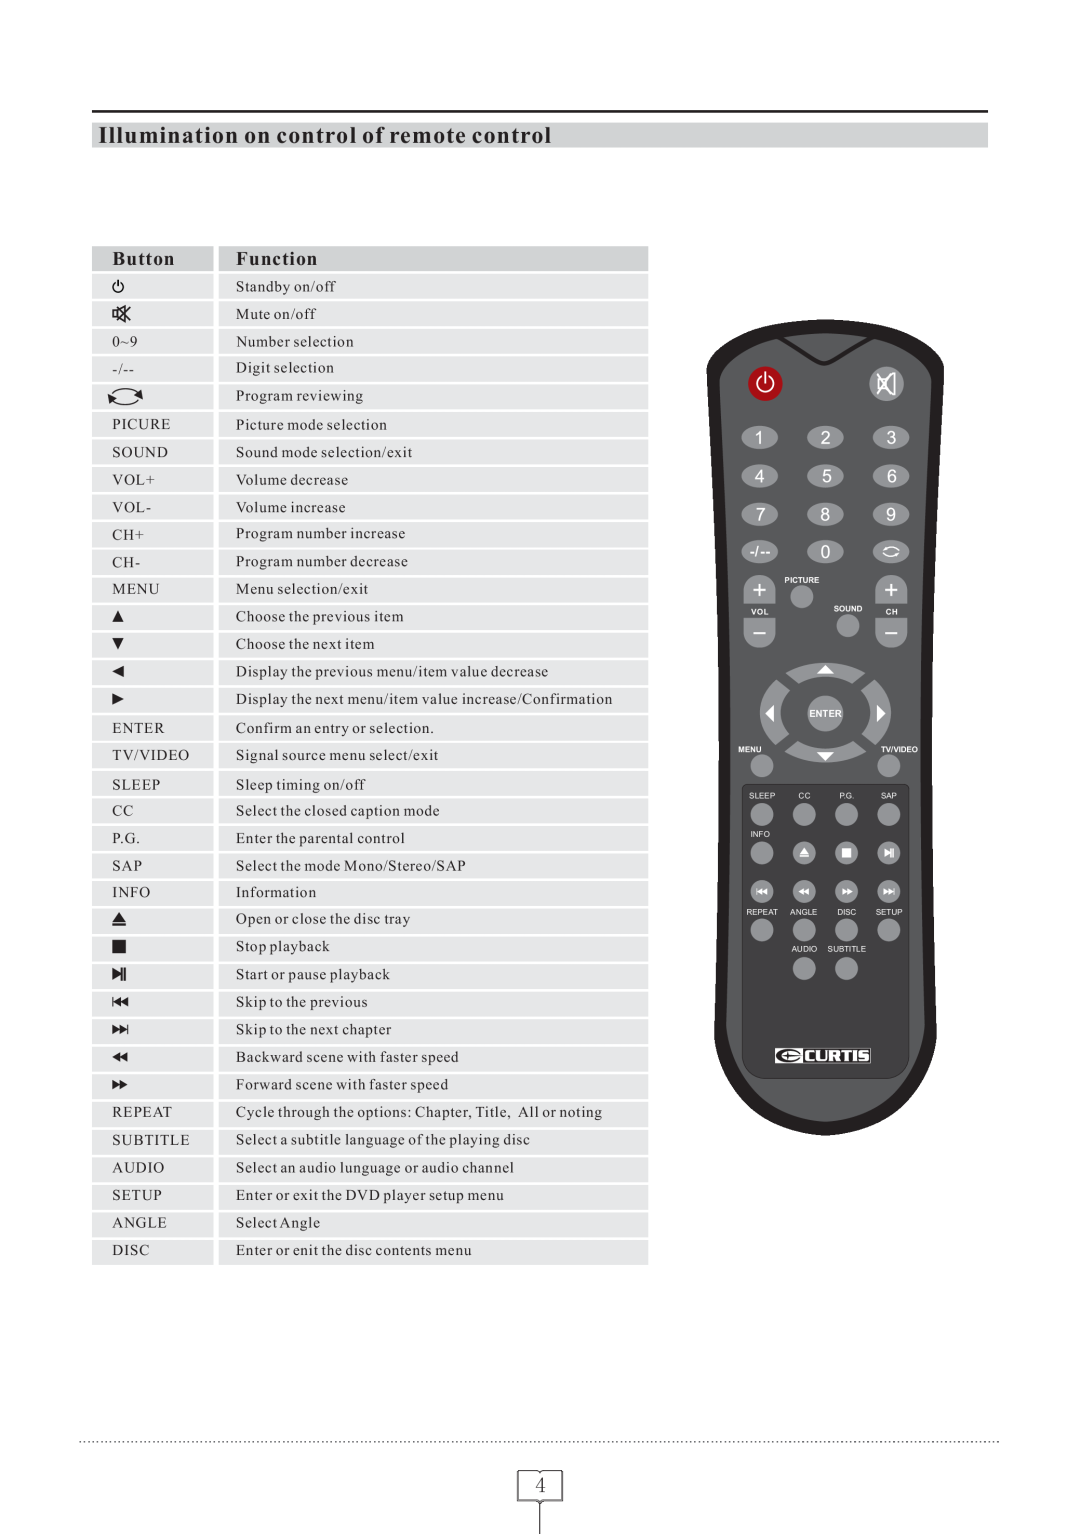 Curtis LCDVD152 manual Illumination on control of remote control, Button, Function 